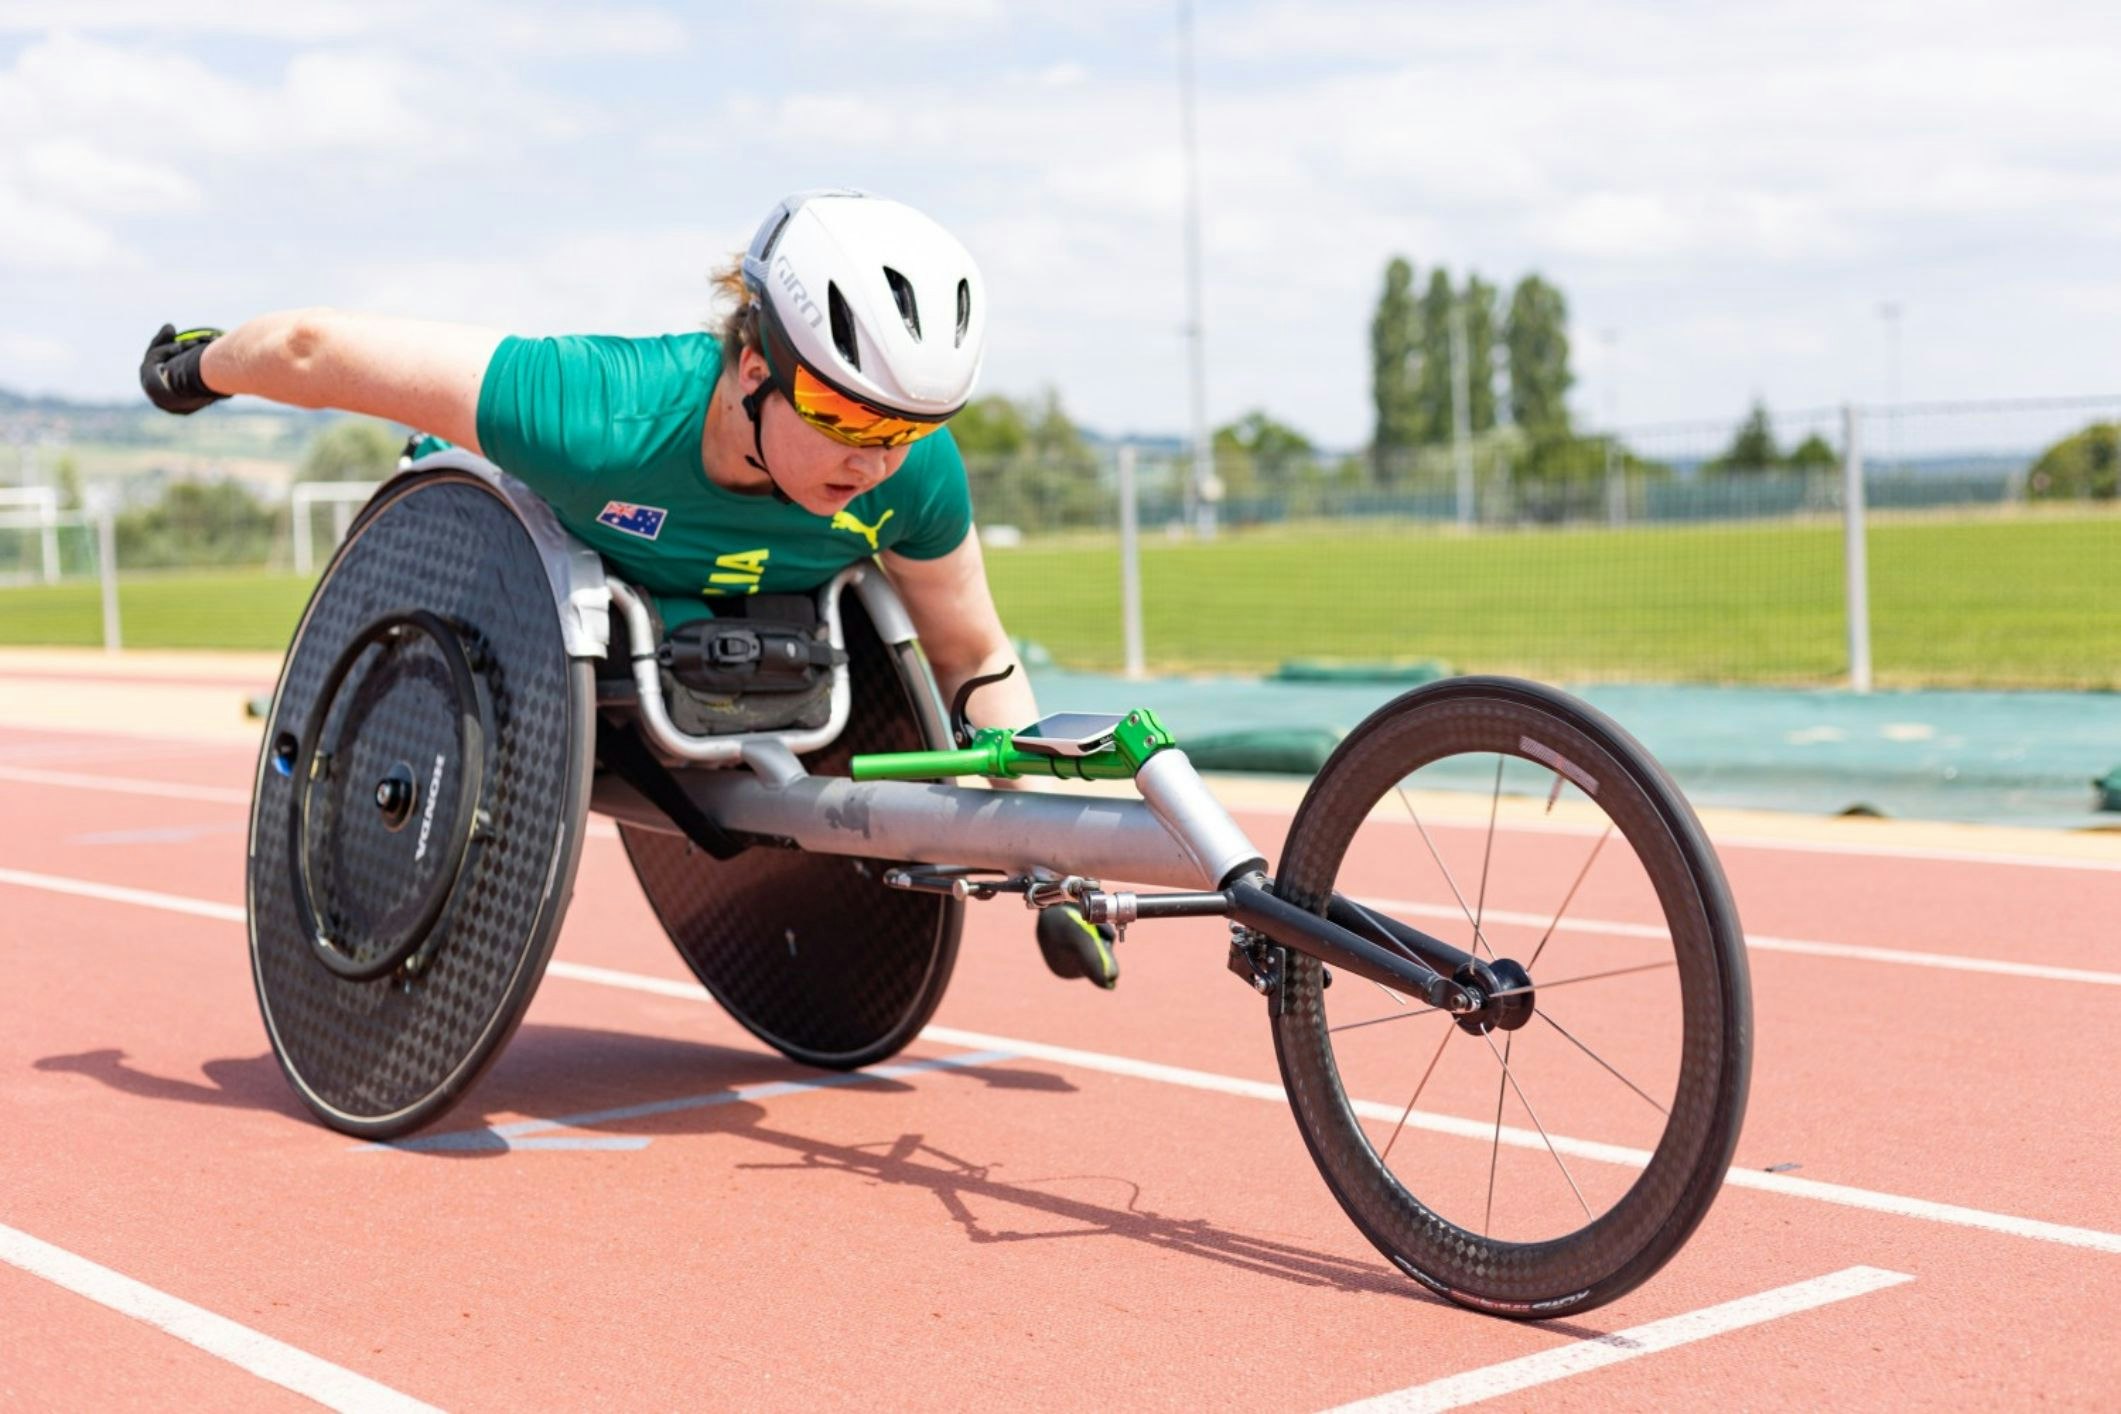 <p>The World Athletics Championships will be broadcast live and free on 9Now, in partnership with Paralympics Australia. . [Image source: courtesy of Athletics Australia]</p>
